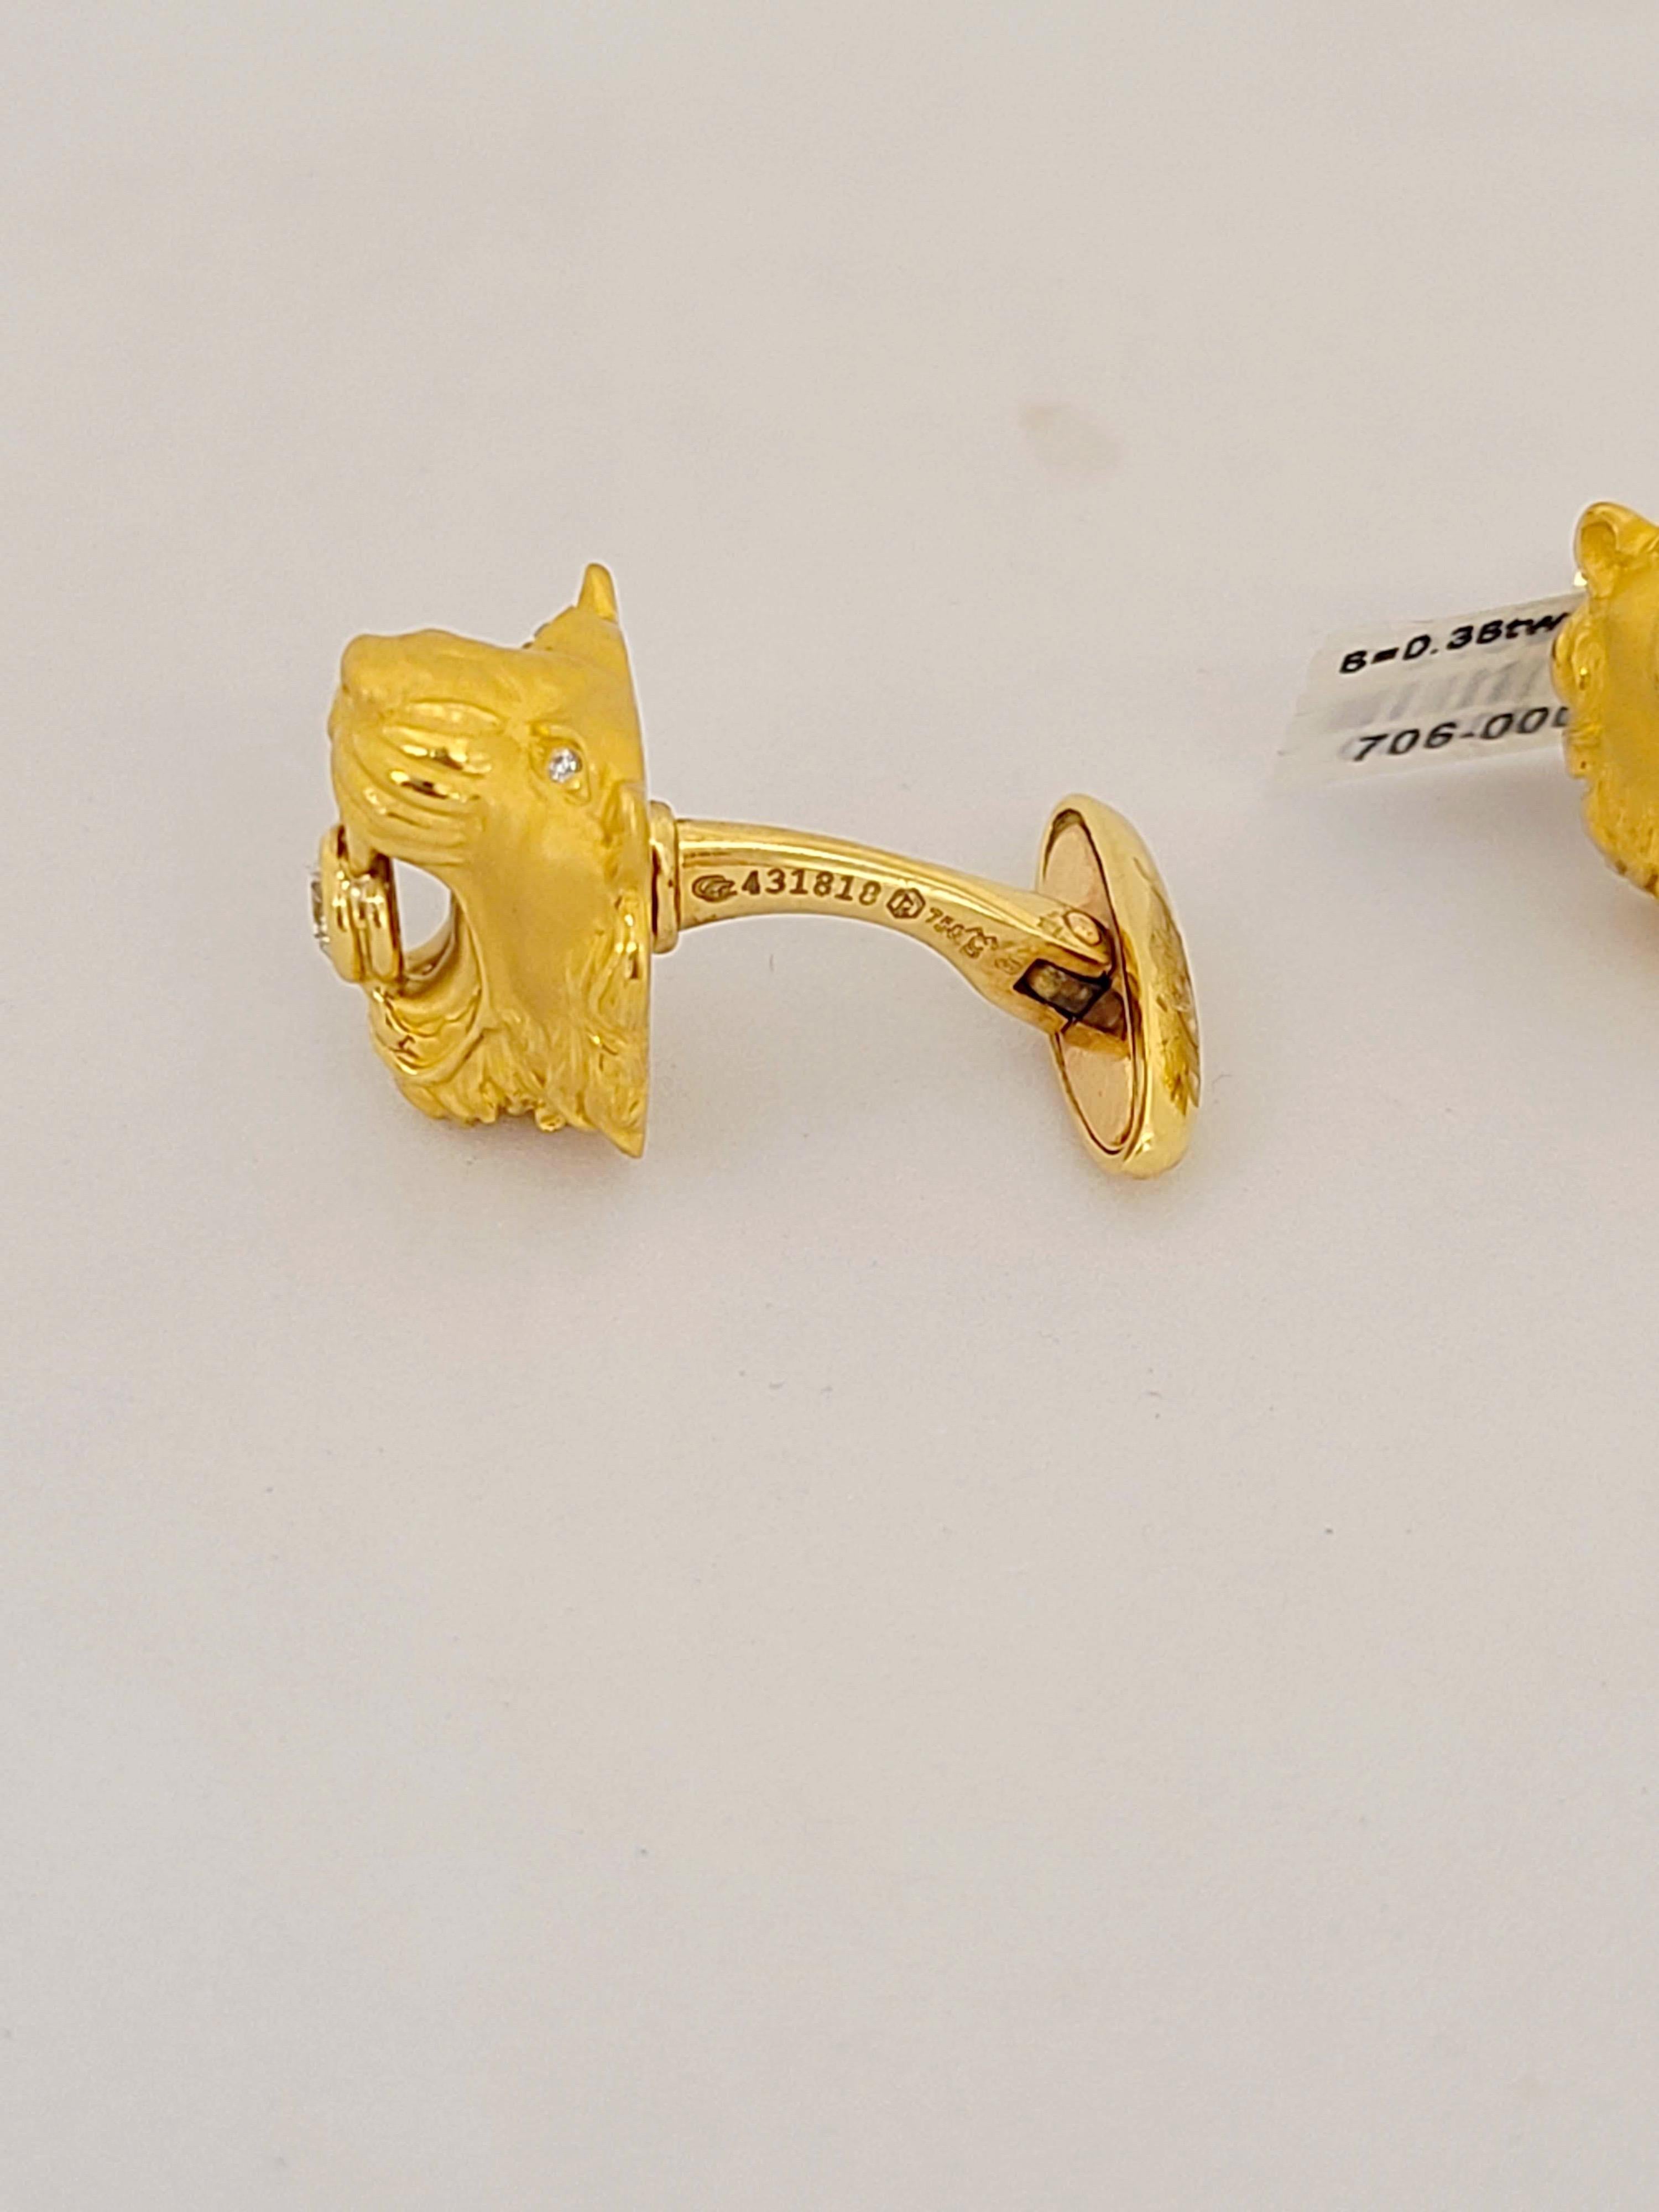 Carrera Y Carrera has built its famous name on figurative designs, an obsession with surface finishes, and a compelling way of seeing beauty in art and nature. These 18 karat yellow gold cufflinks are a perfect example of Carrera's iconic designs.